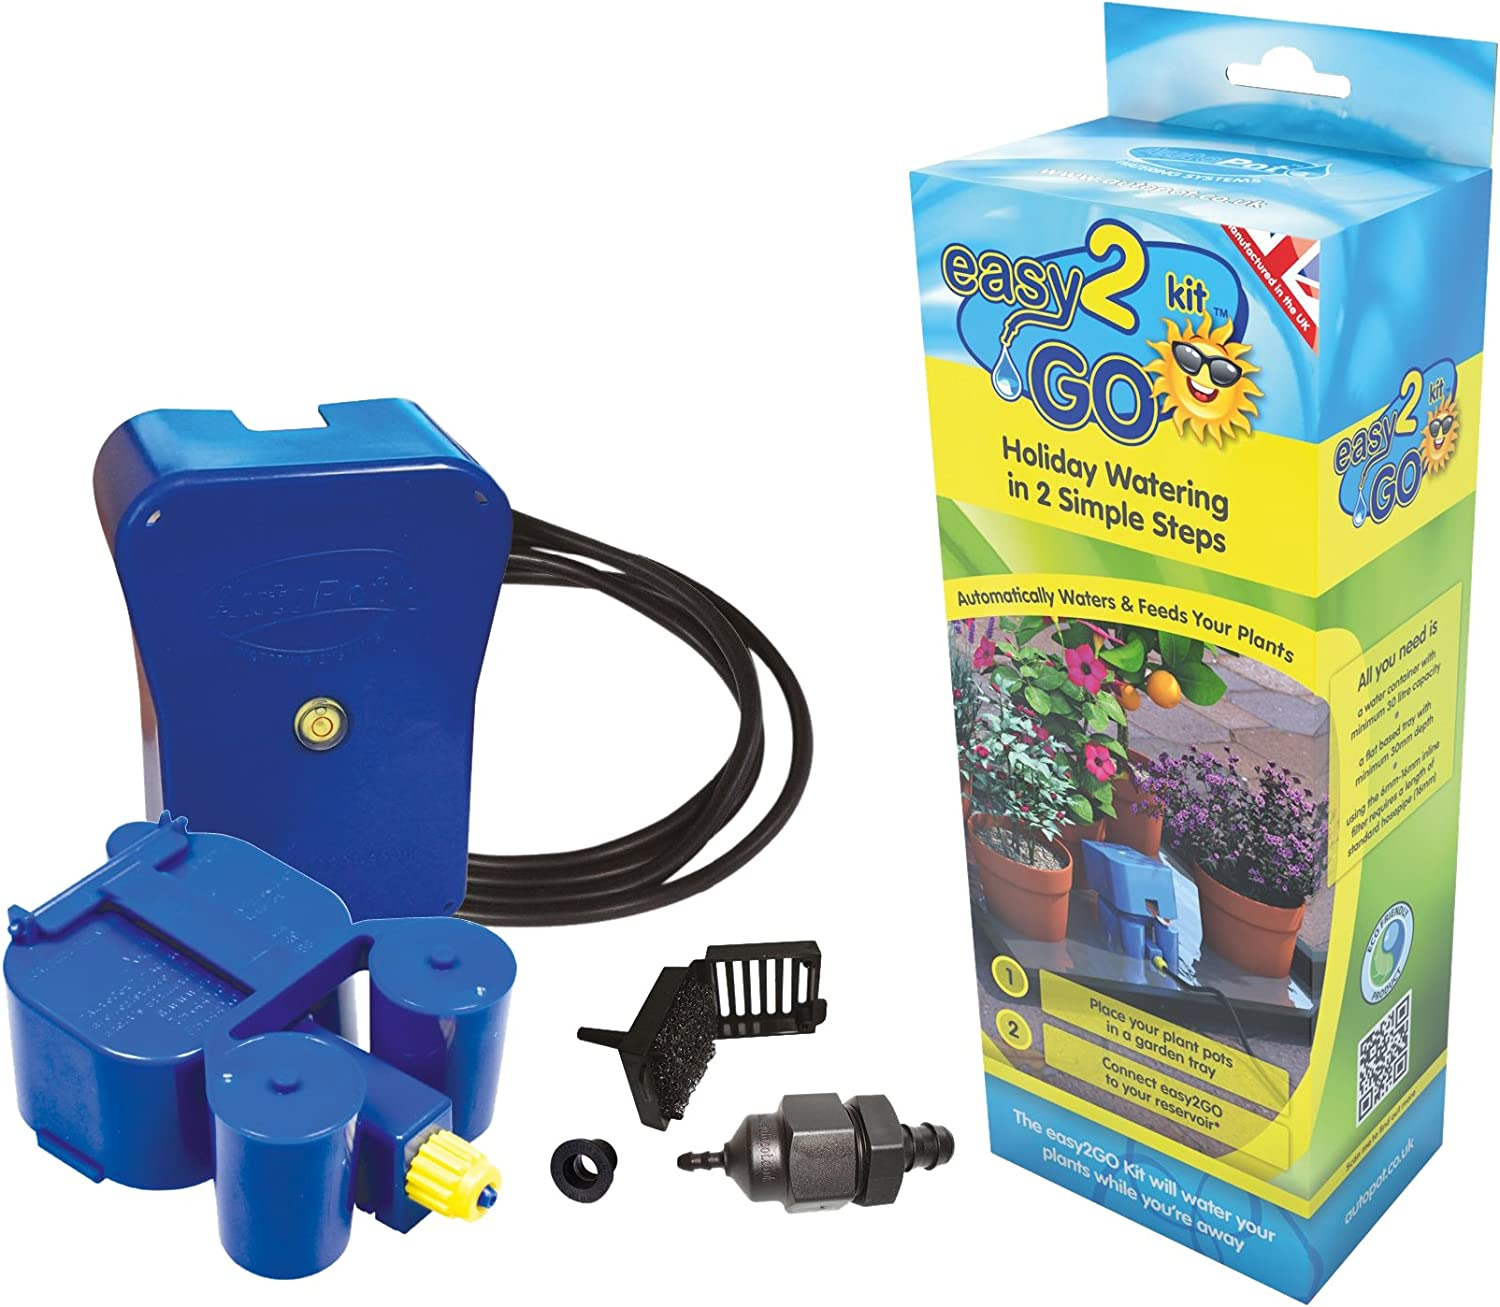 Autopot AP400 Easy2Go Holiday Watering Kit - Blue